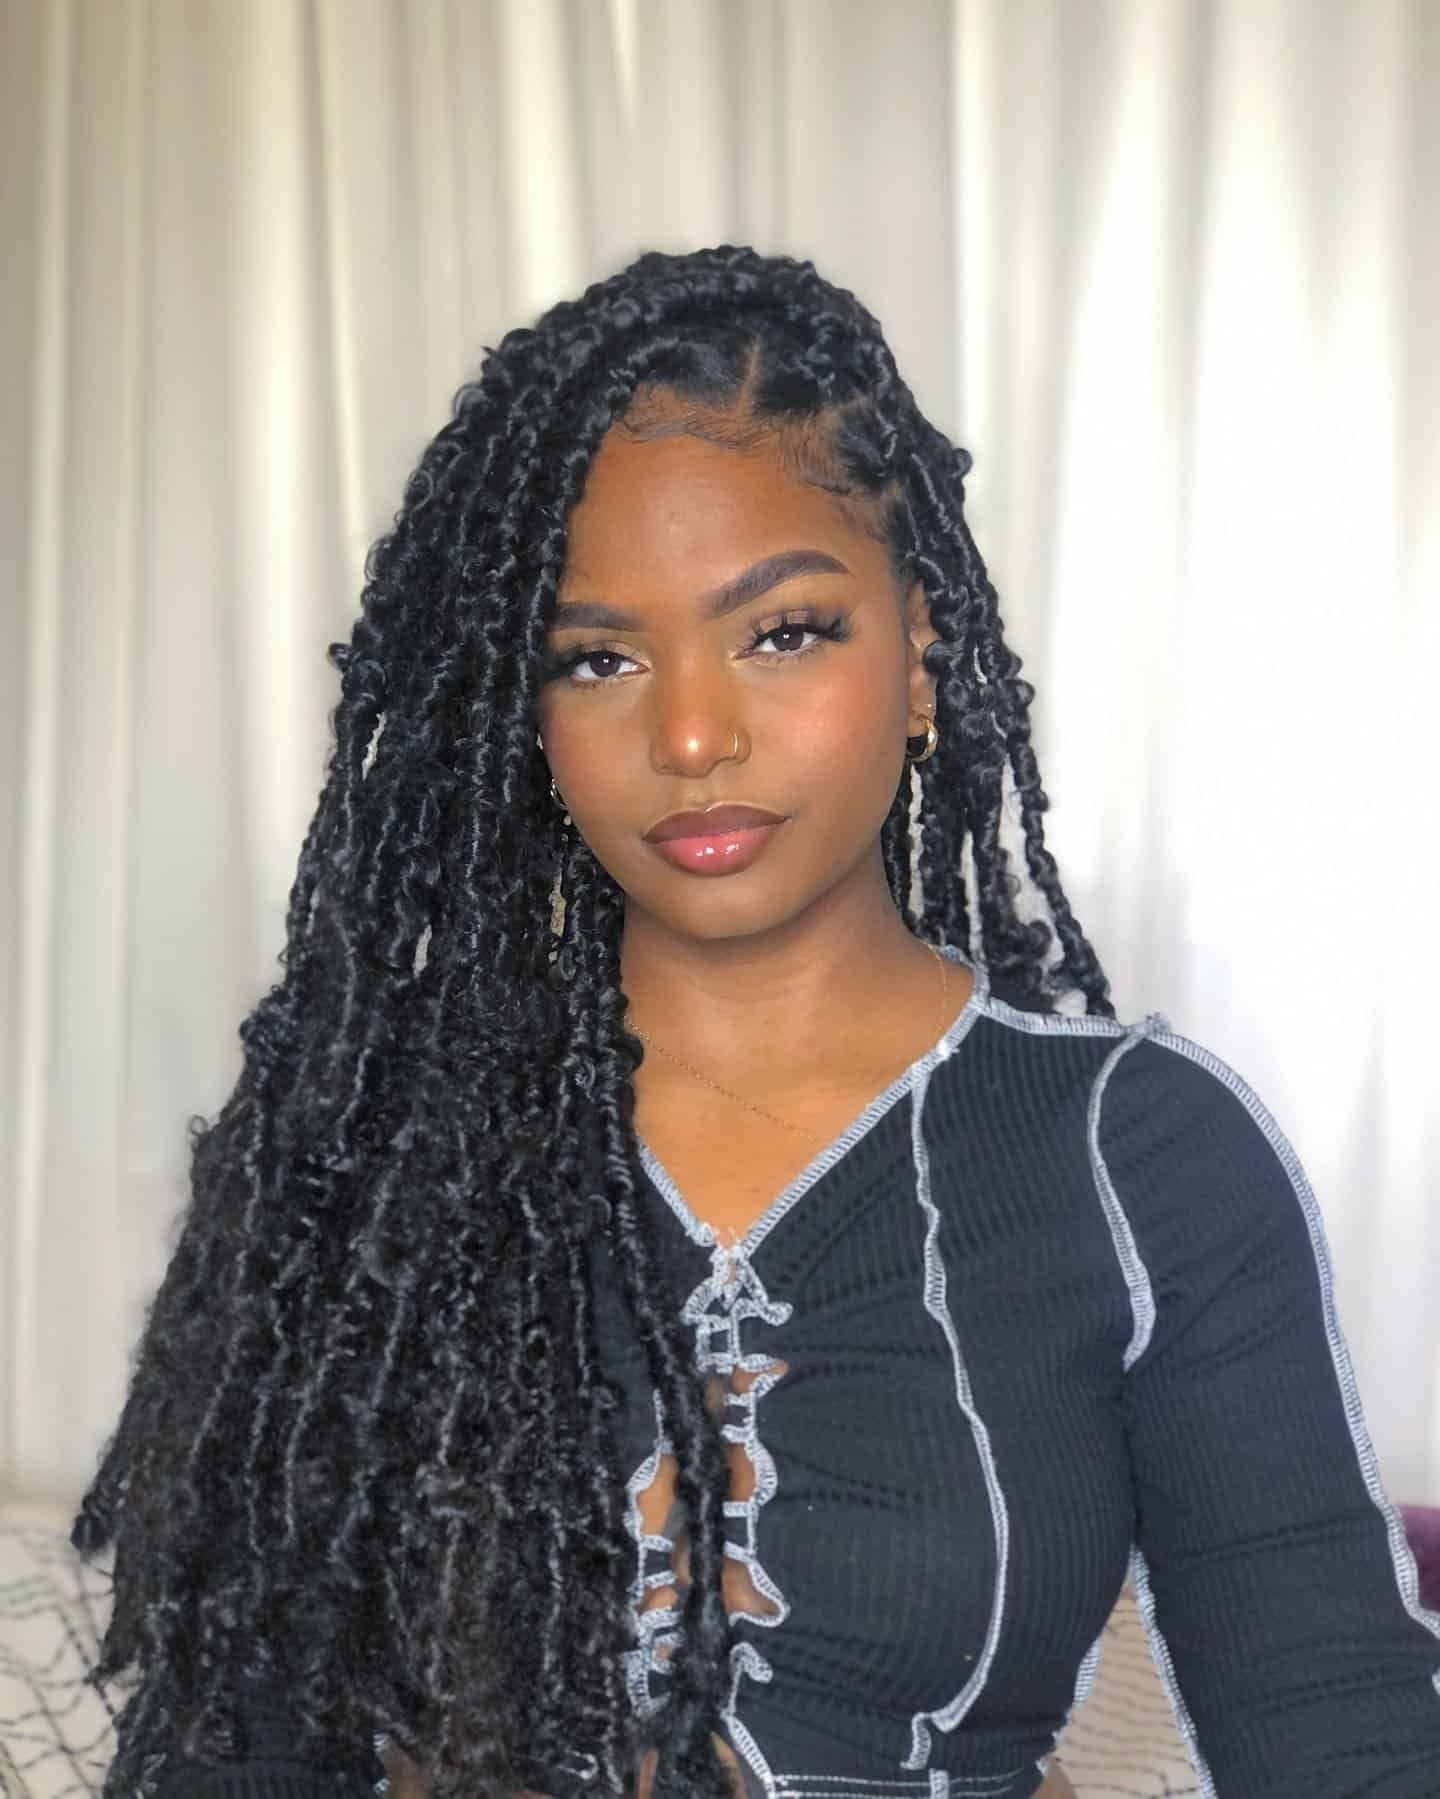 A Woman With Long Braids And A Black Top